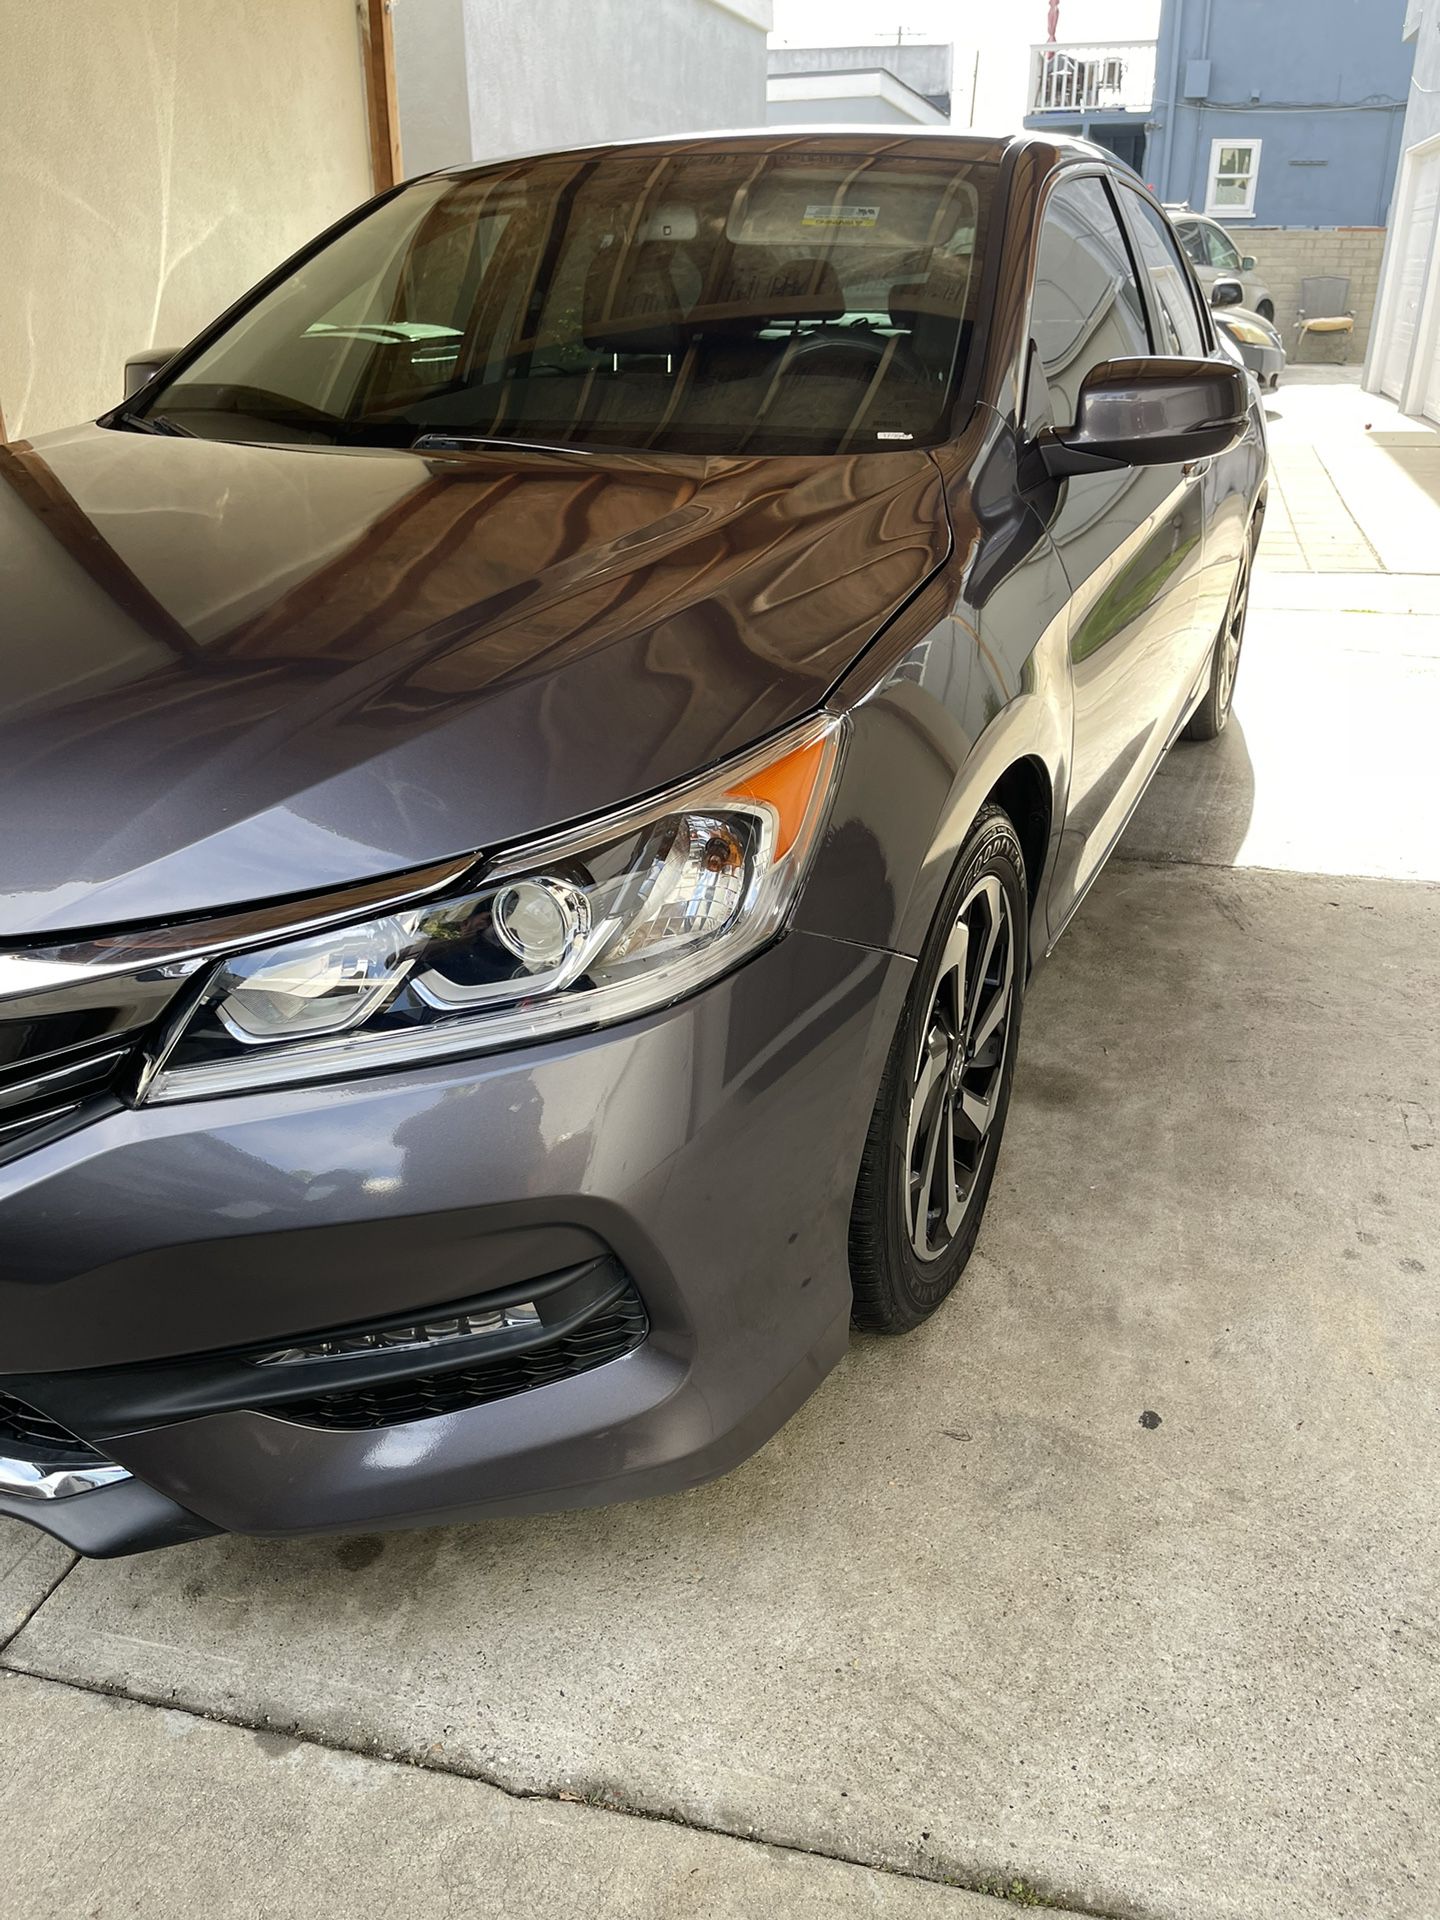 2017 Honda https://offerup.com/redirect/?o=QWNjb3JkLkxz. Salvage.Tittle  With. Low Miles 